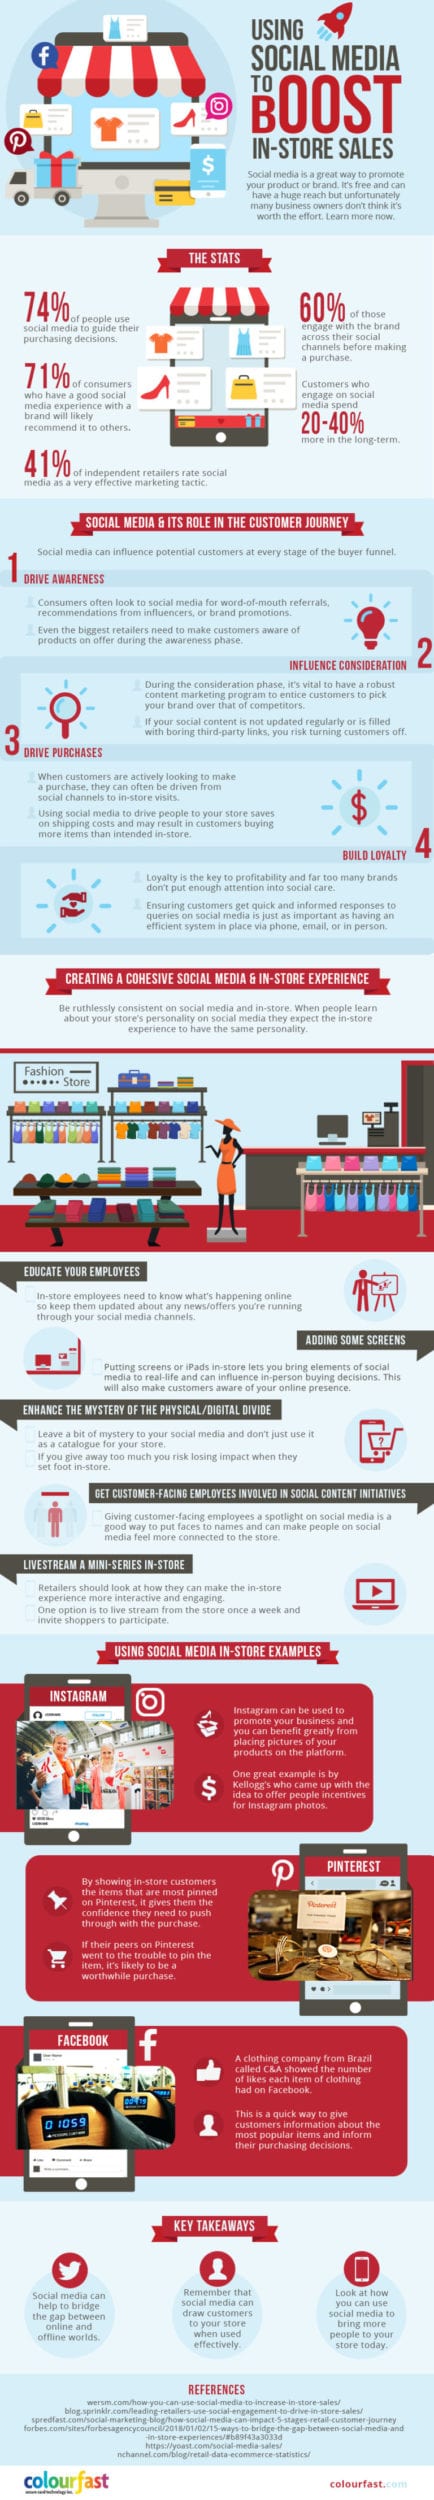 infographic: how to use social media to boost in store sales